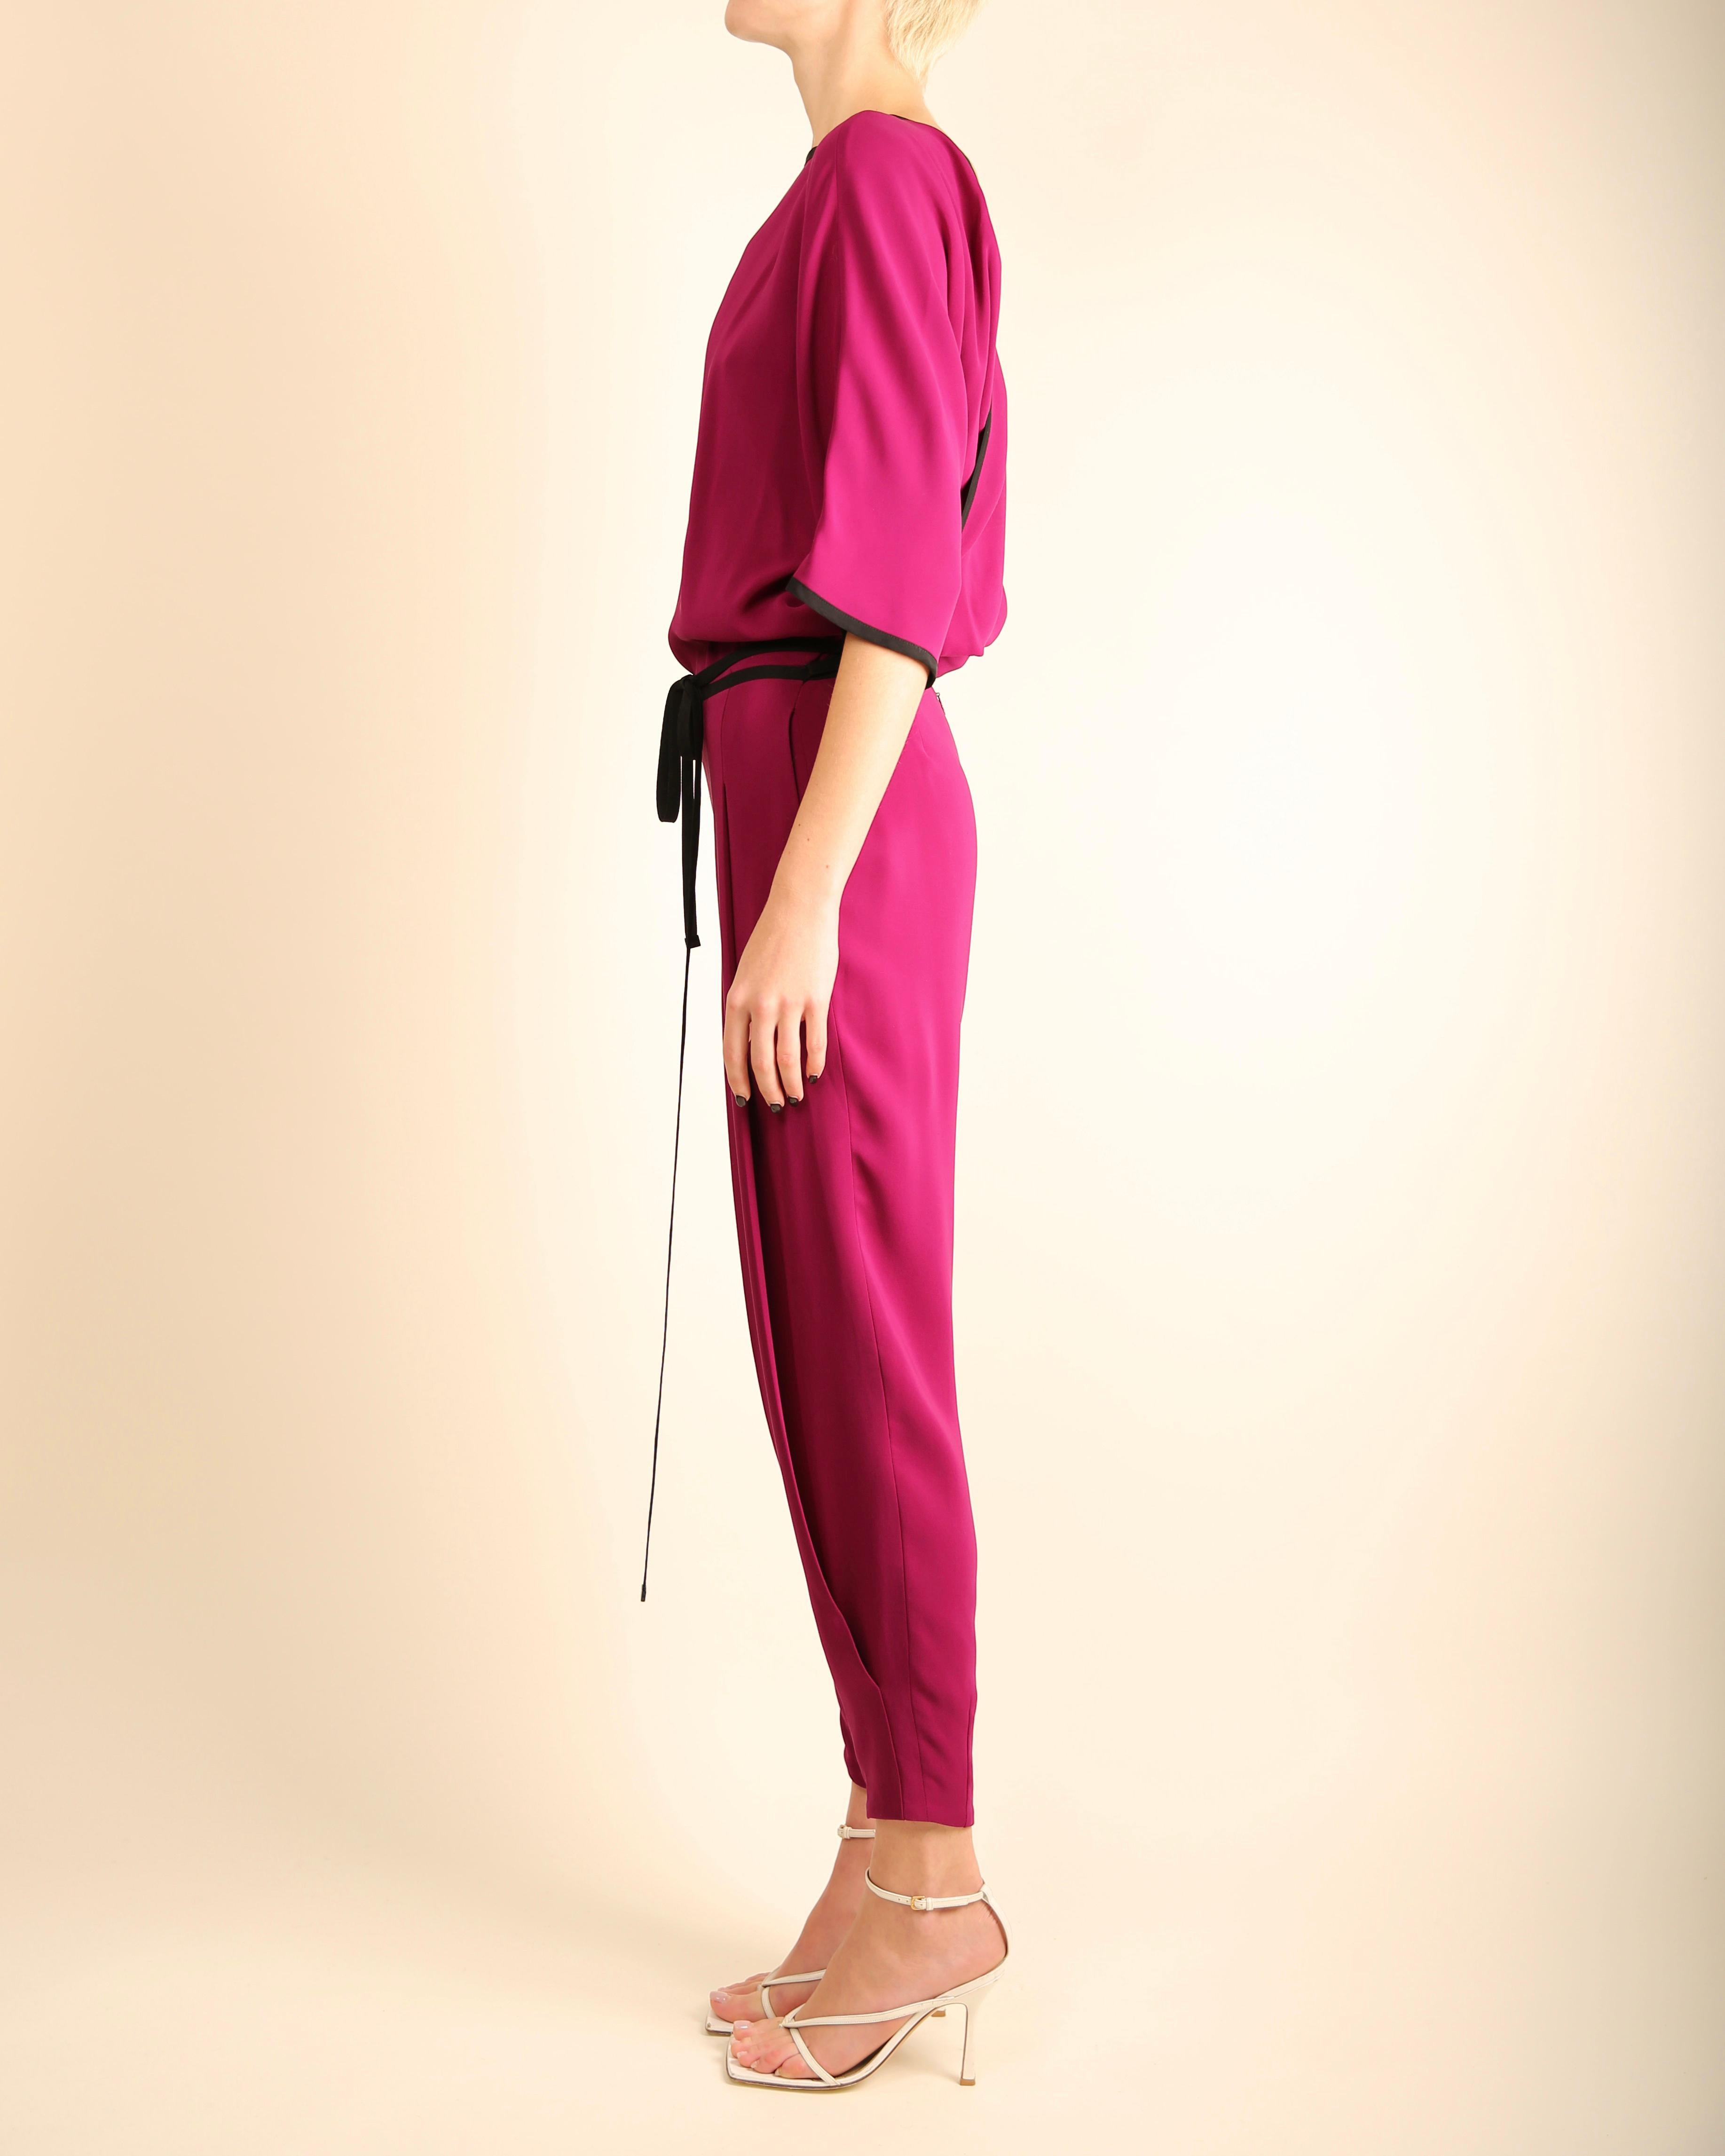 Gucci S/S 2014 silk magenta black backless dolman tapered pant jumpsuit  For Sale 5